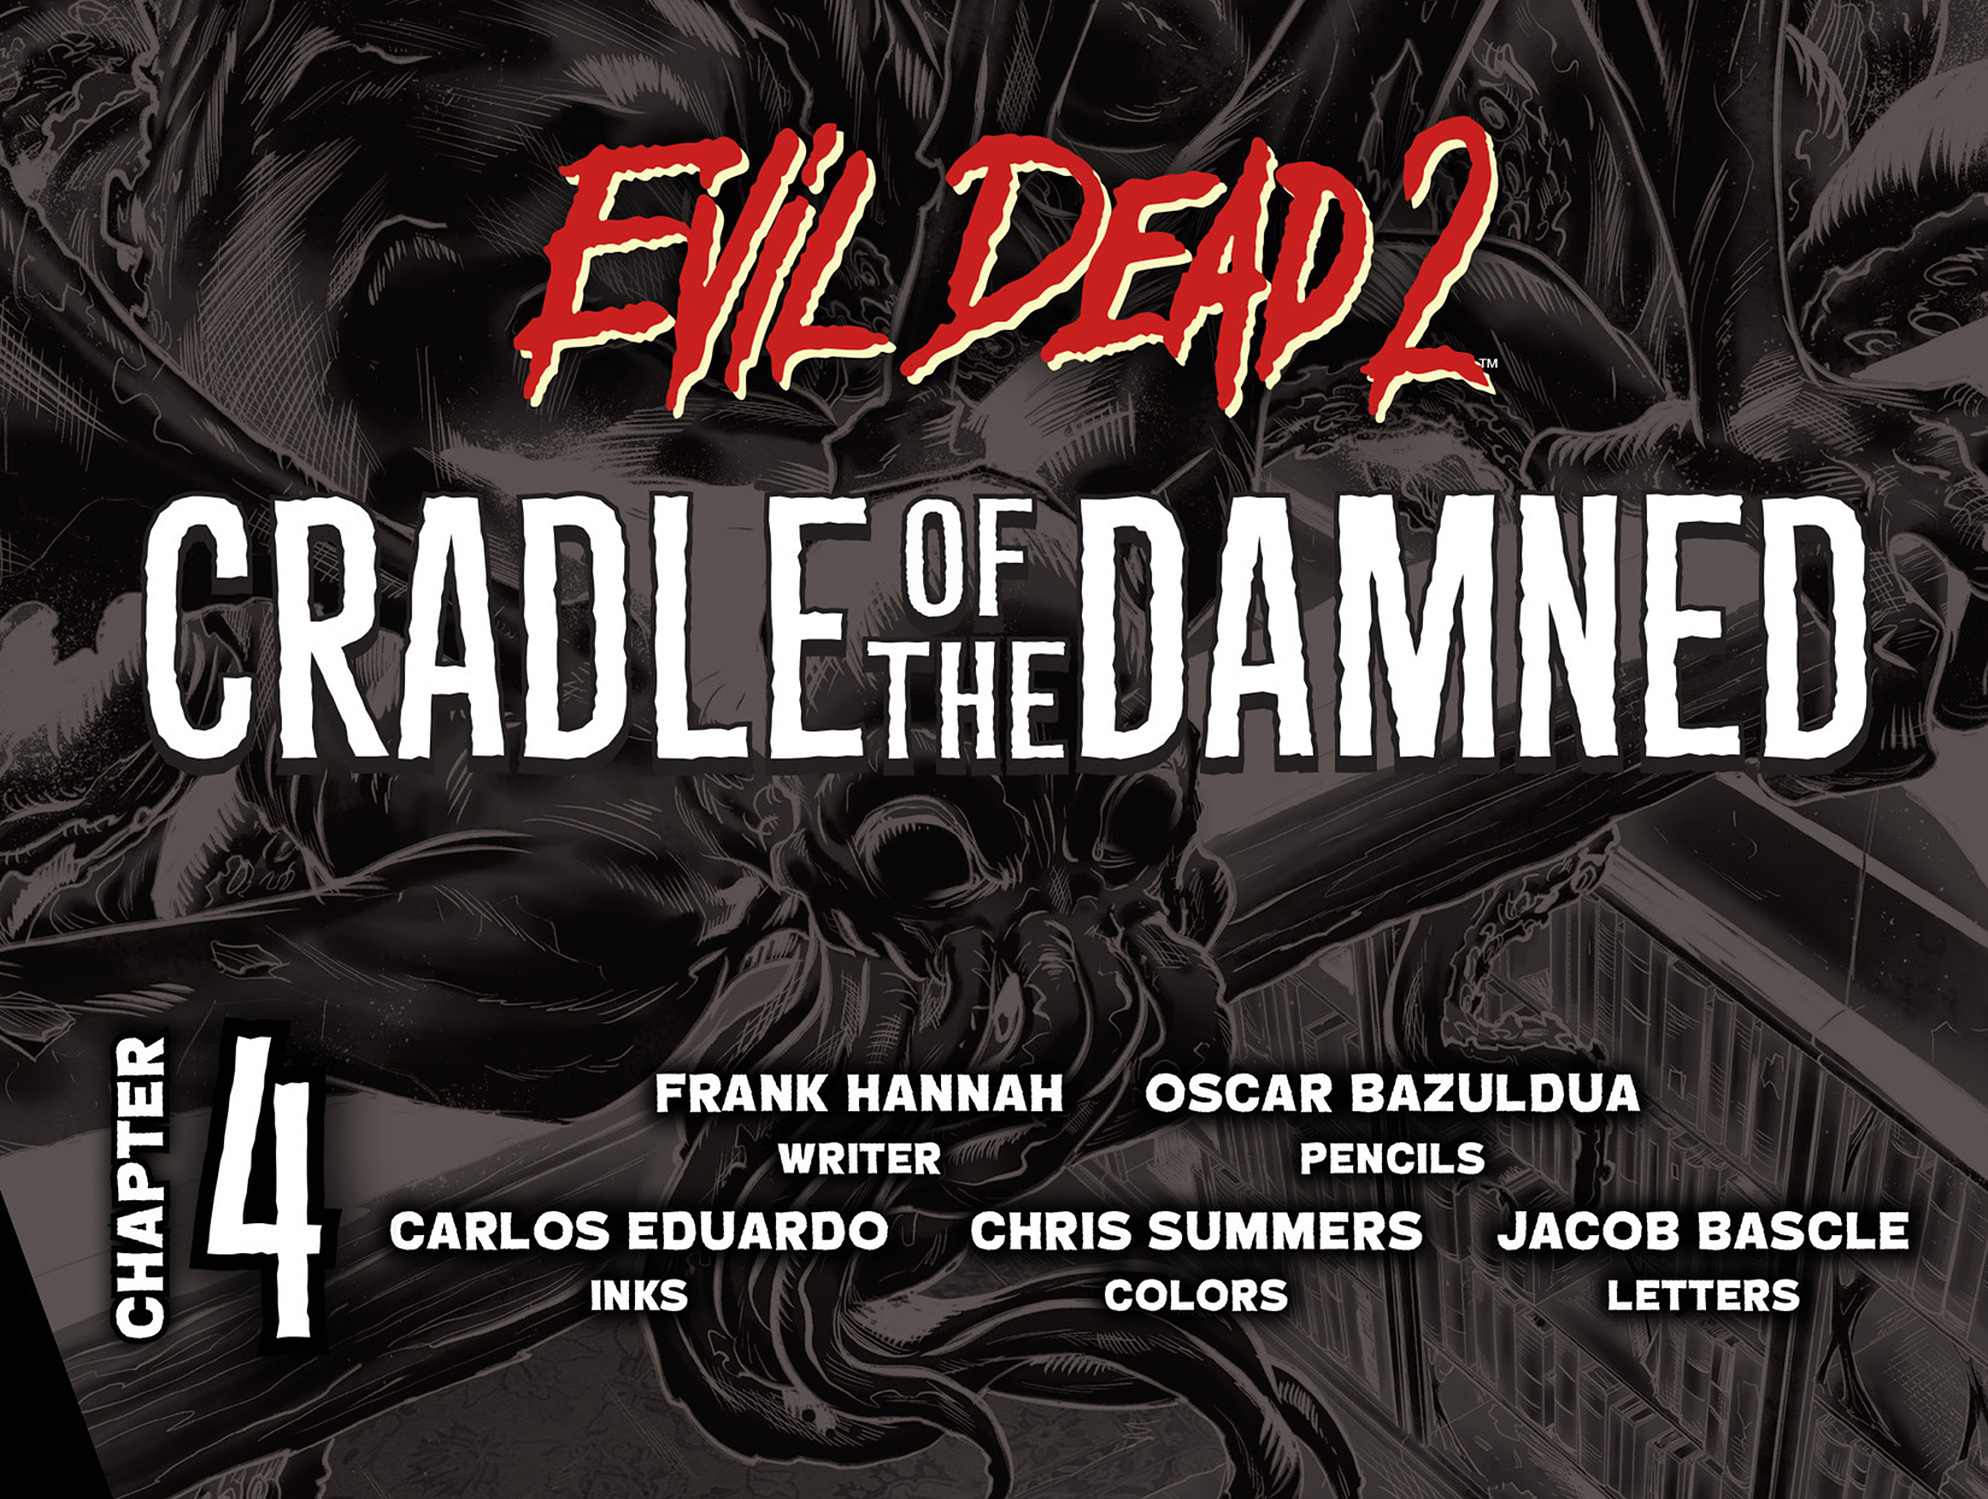 Read online Evil Dead 2: Cradle of the Damned comic -  Issue #4 - 2